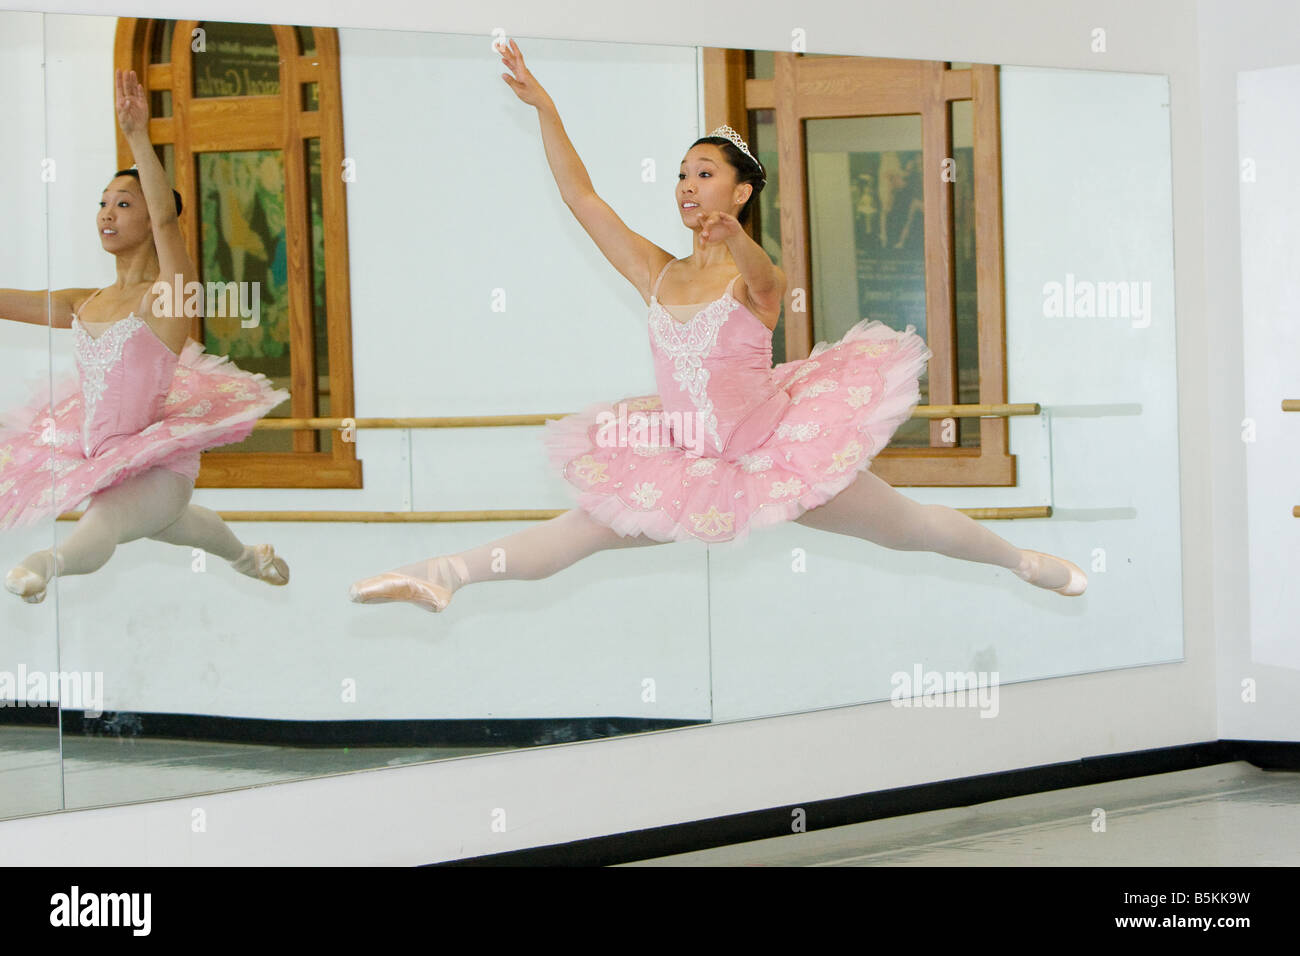 godkende Trofast skrige A ballerina in a pink tutu jumping through the air in front of a mirror  Stock Photo - Alamy